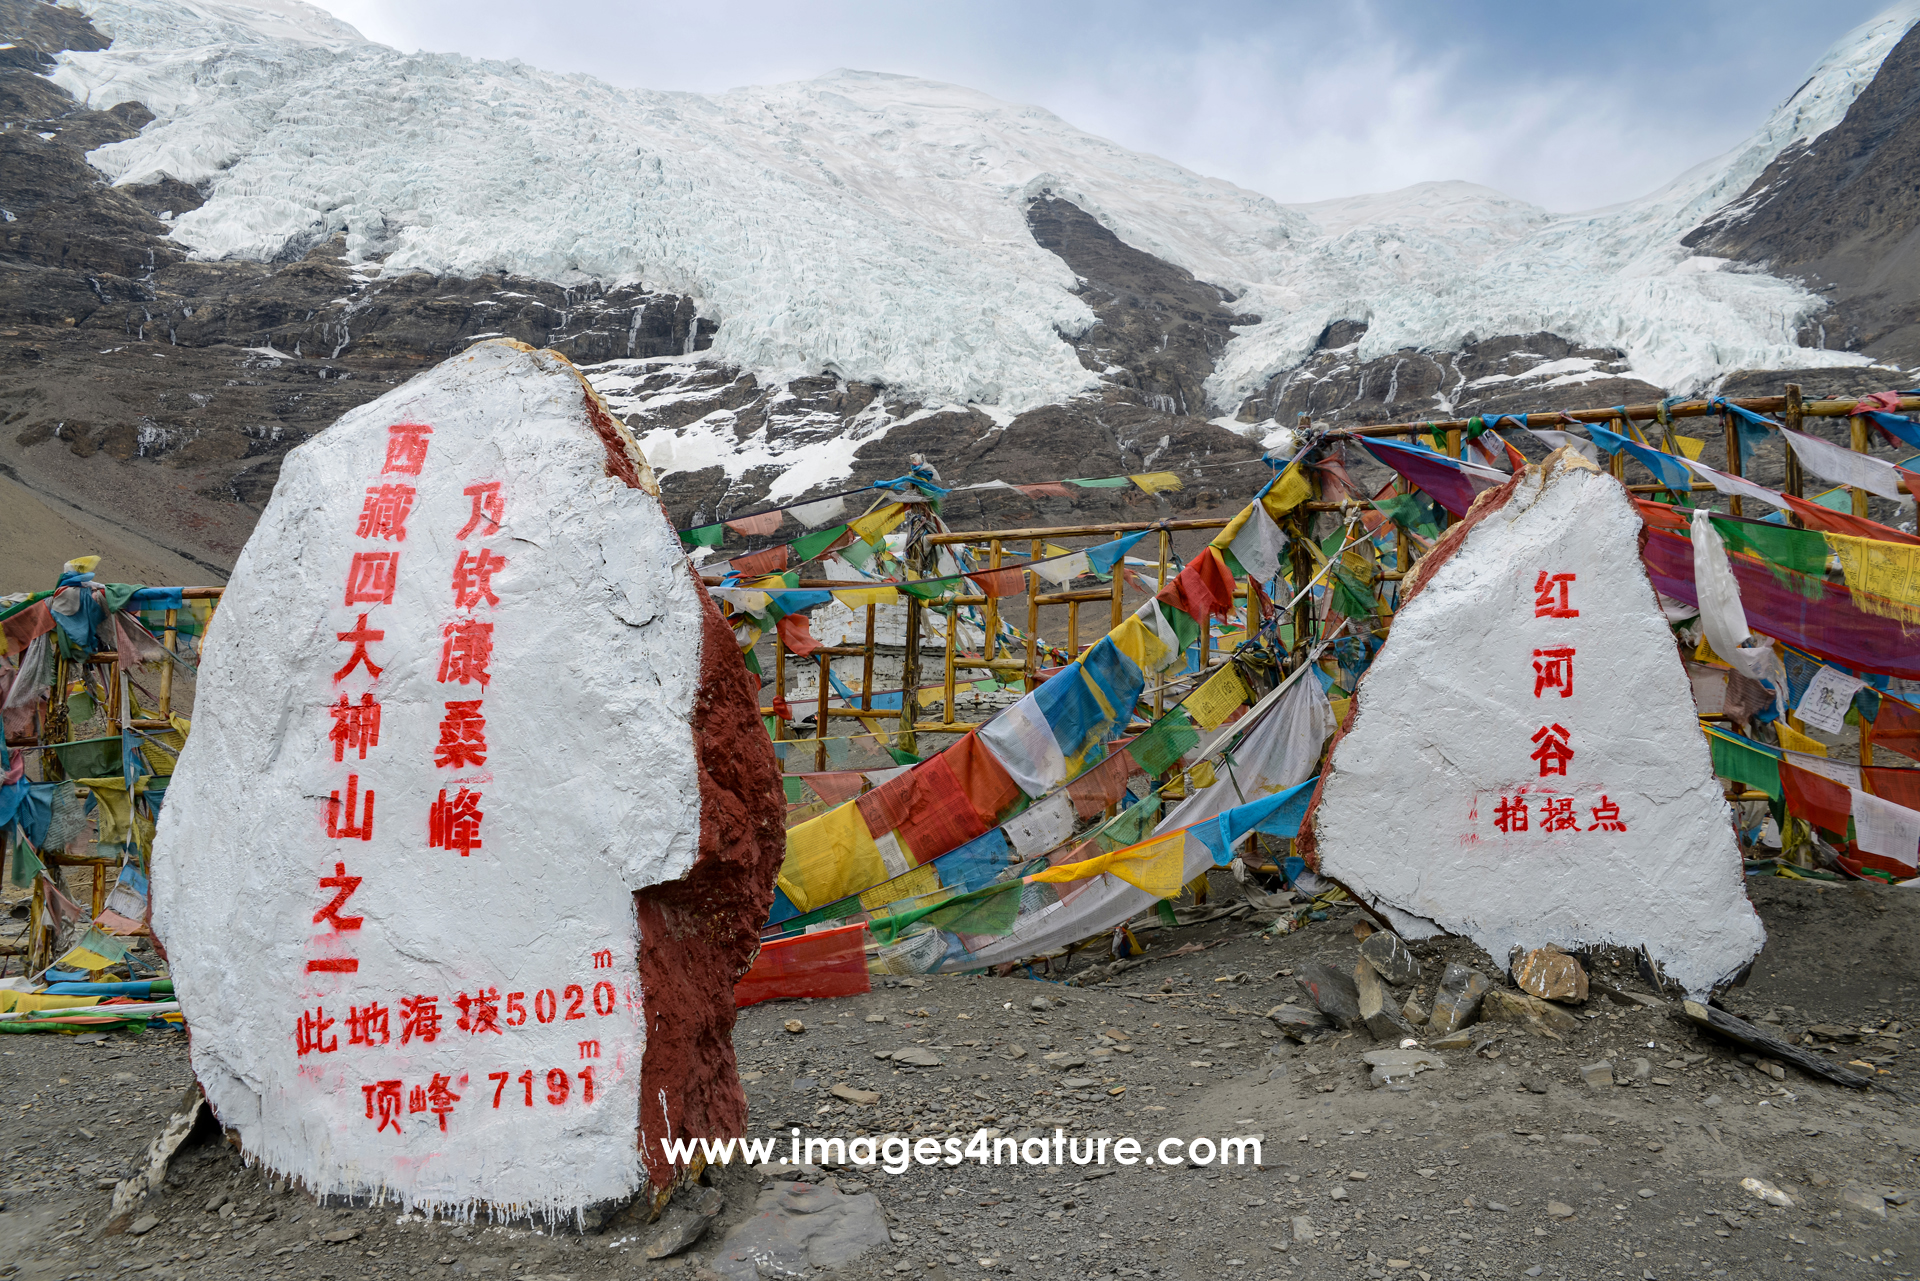 Two white painted stones with Chinese writing and altitude marker 5.020m at Kharola Glacier in Tibet